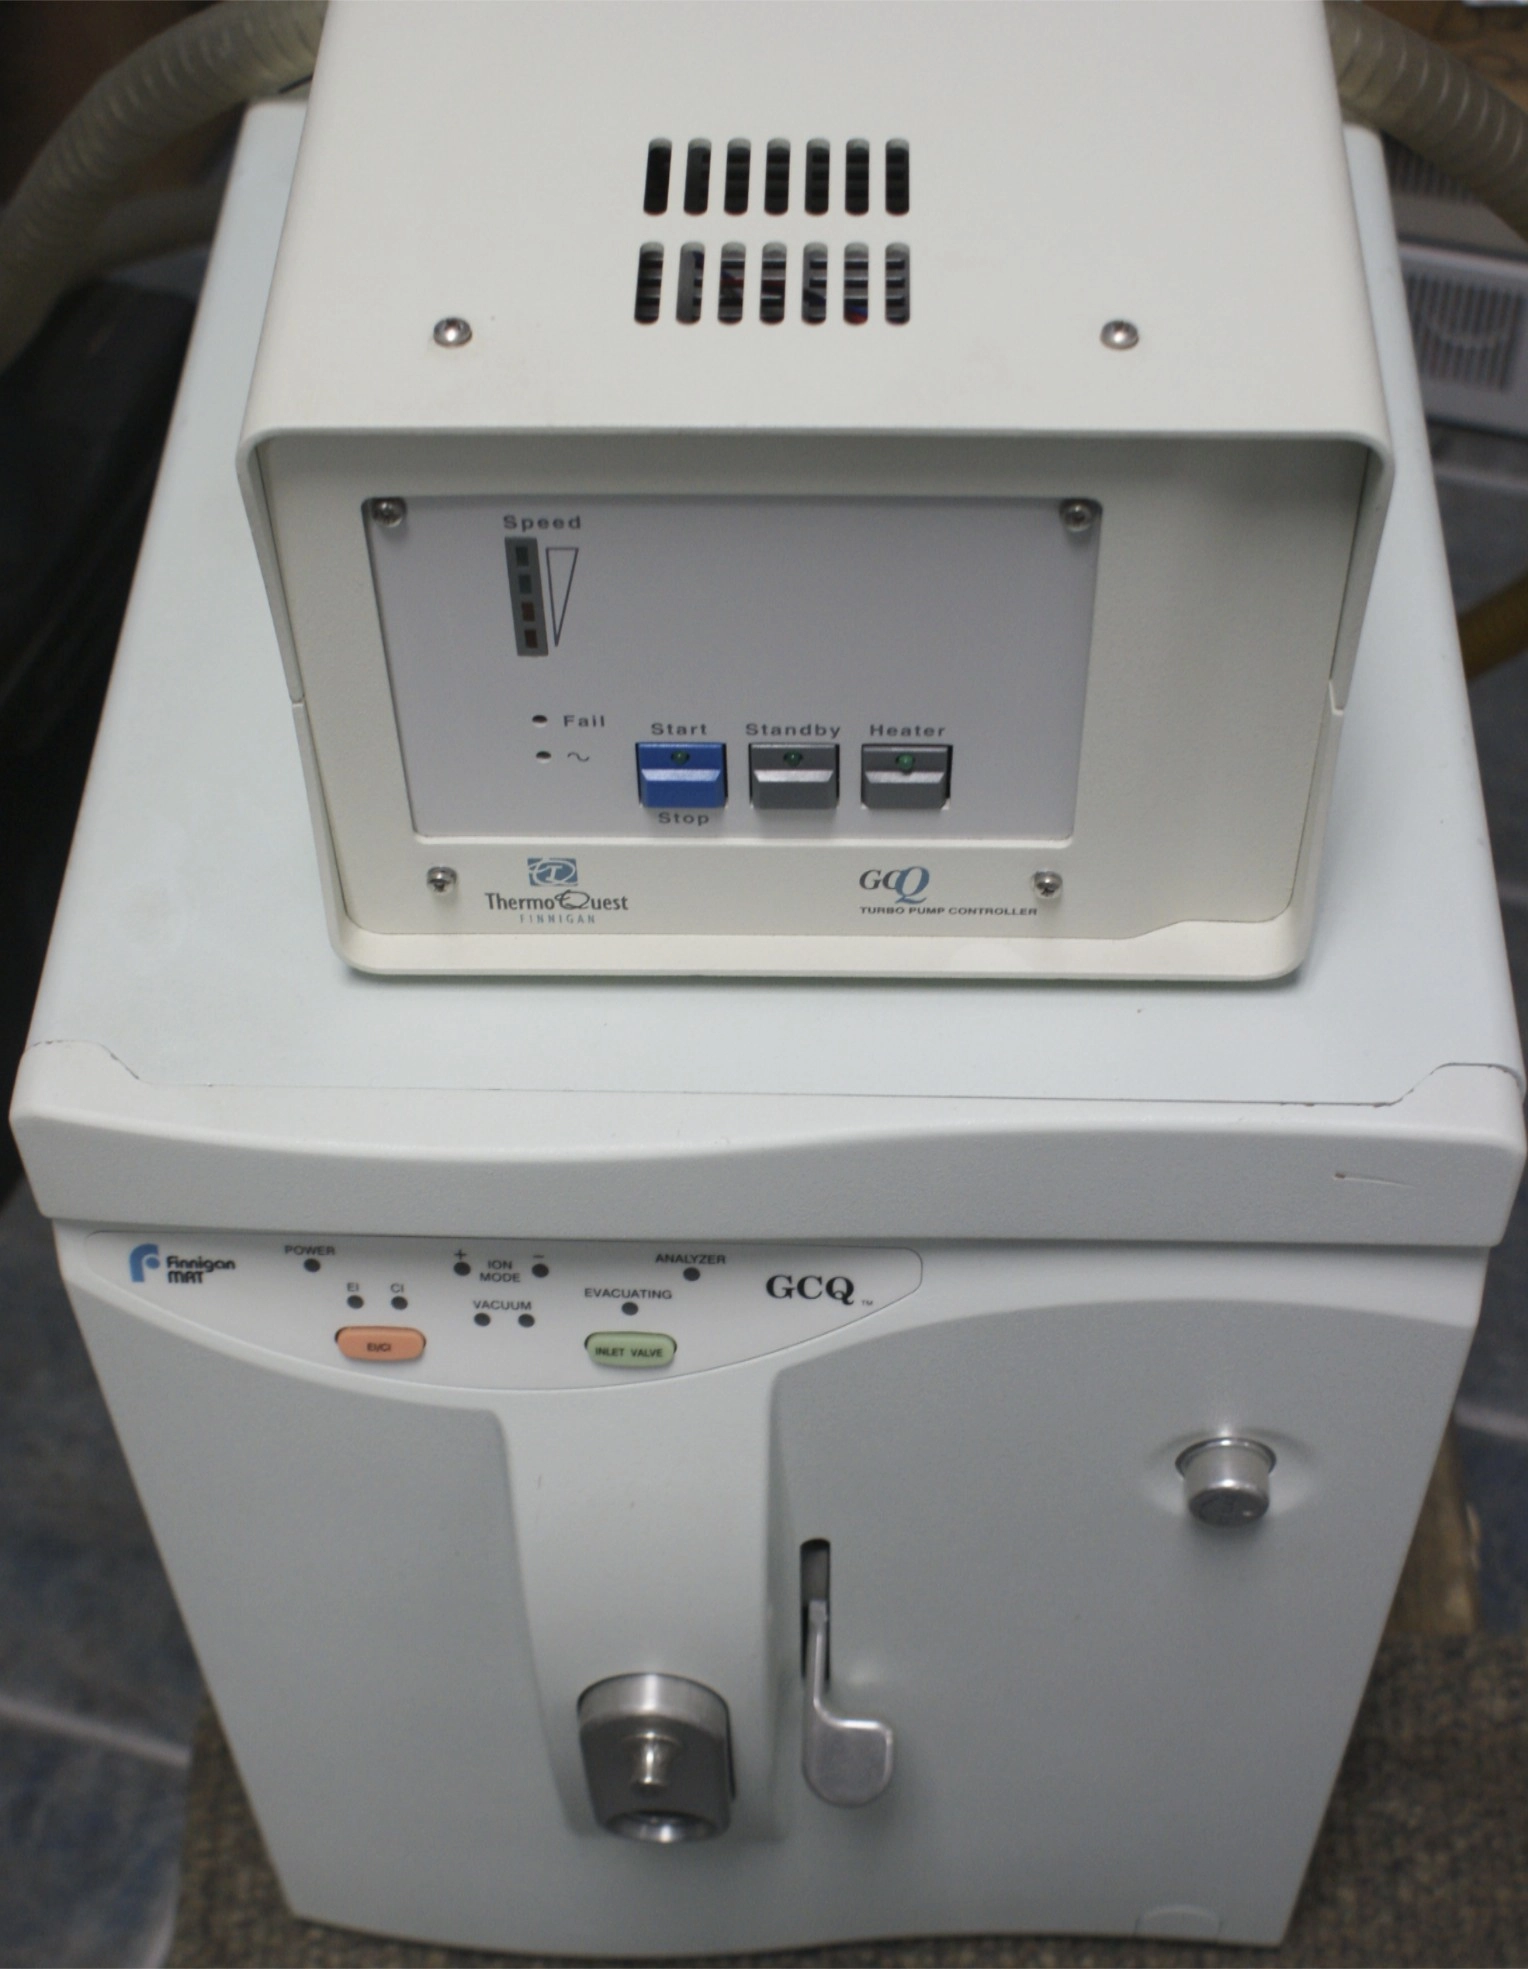 Thermo Quest GCQ Finnegan MAT GCQ Mass Spectrometer with Thermo Quest Finnigan GCQ Turbo Pump Controller used can be refurbis